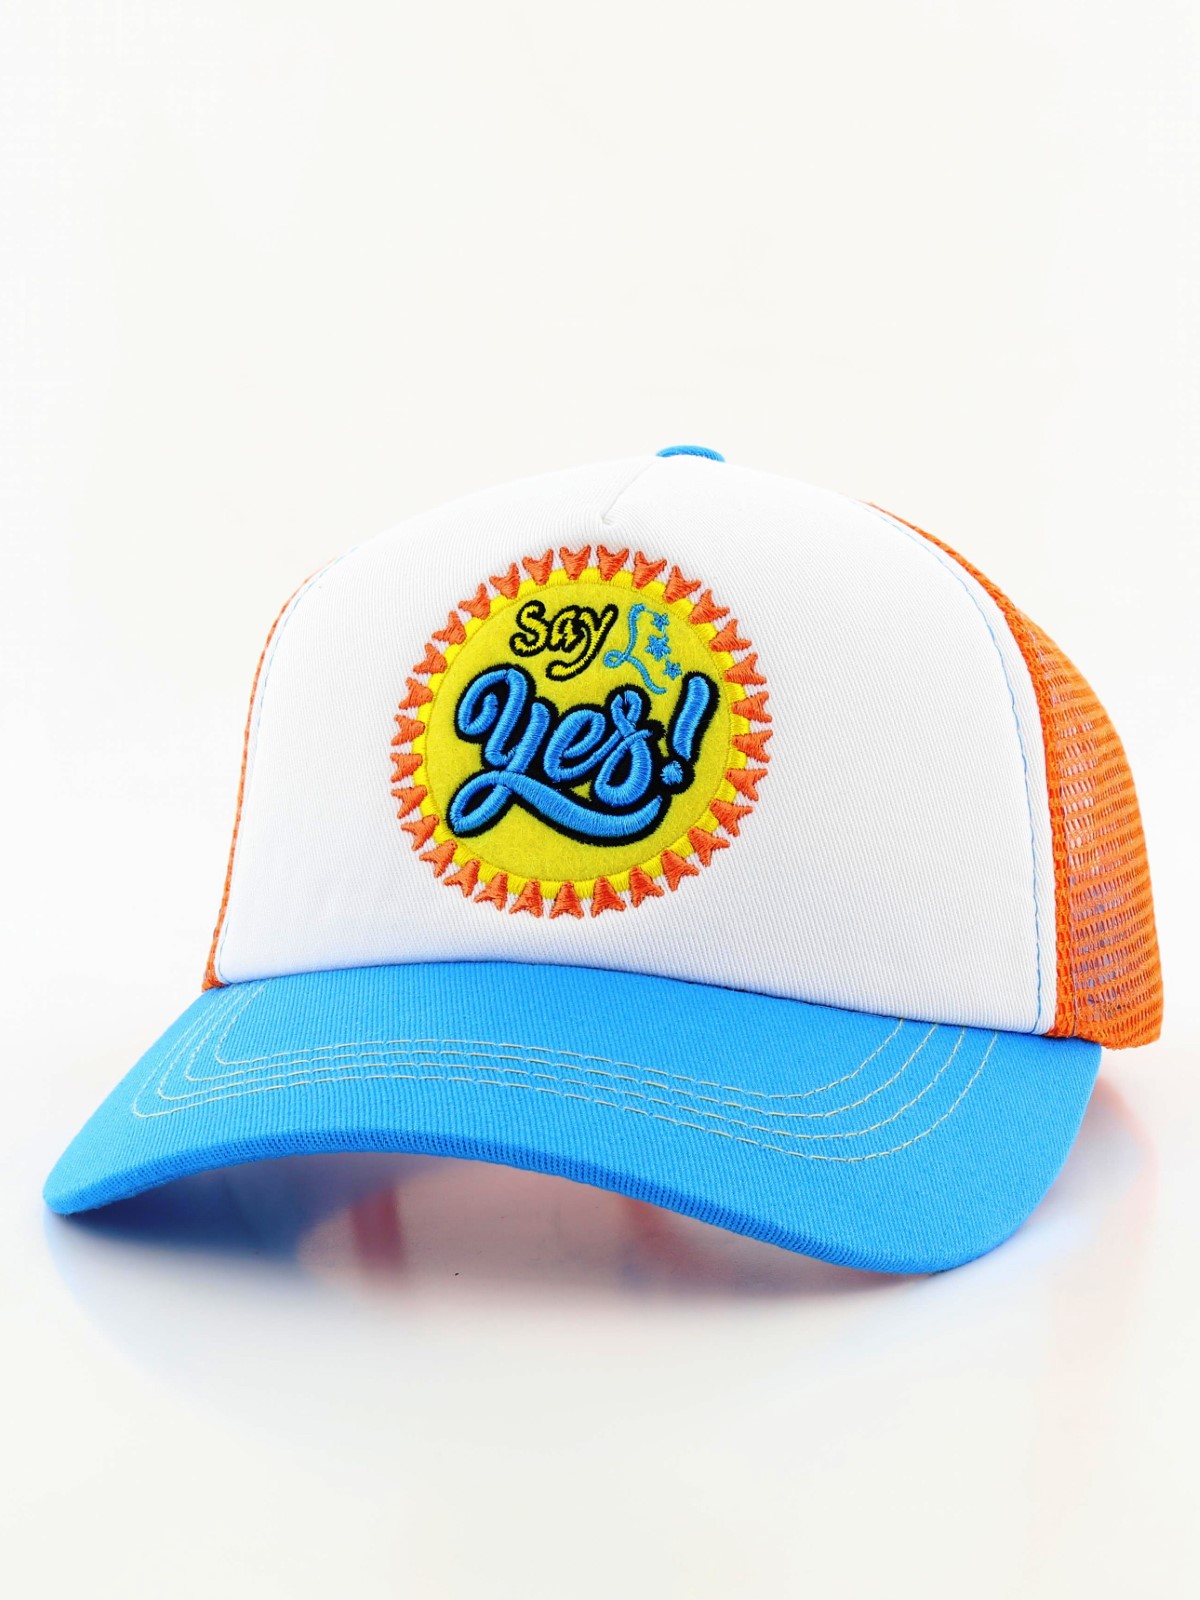 My Town Say Yes 2 Blue/White Trucker Cap